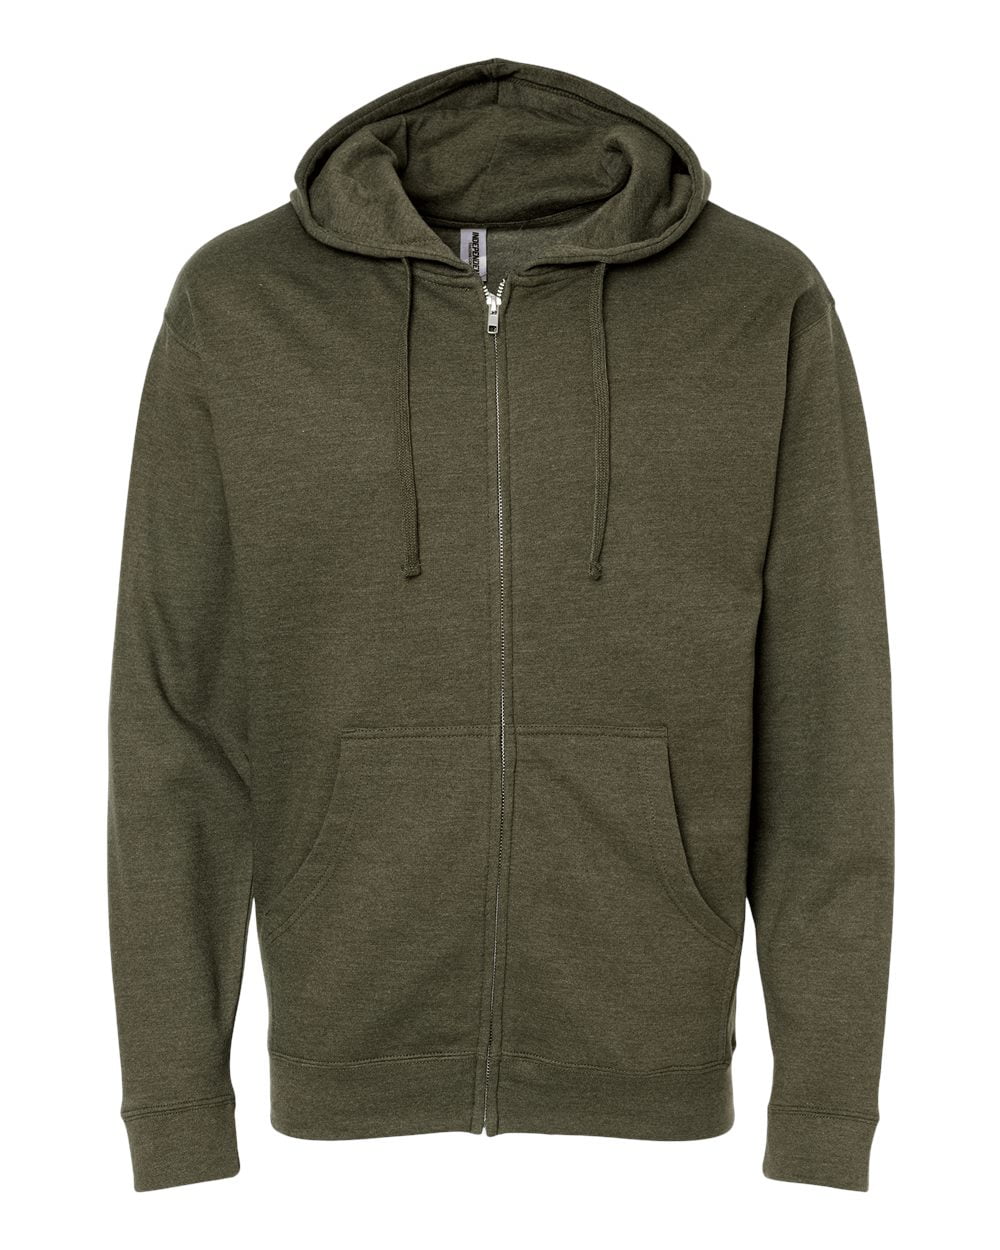 Independent Trading Co. Midweight Full-Zip Hooded Sweatshirt SS4500Z ...